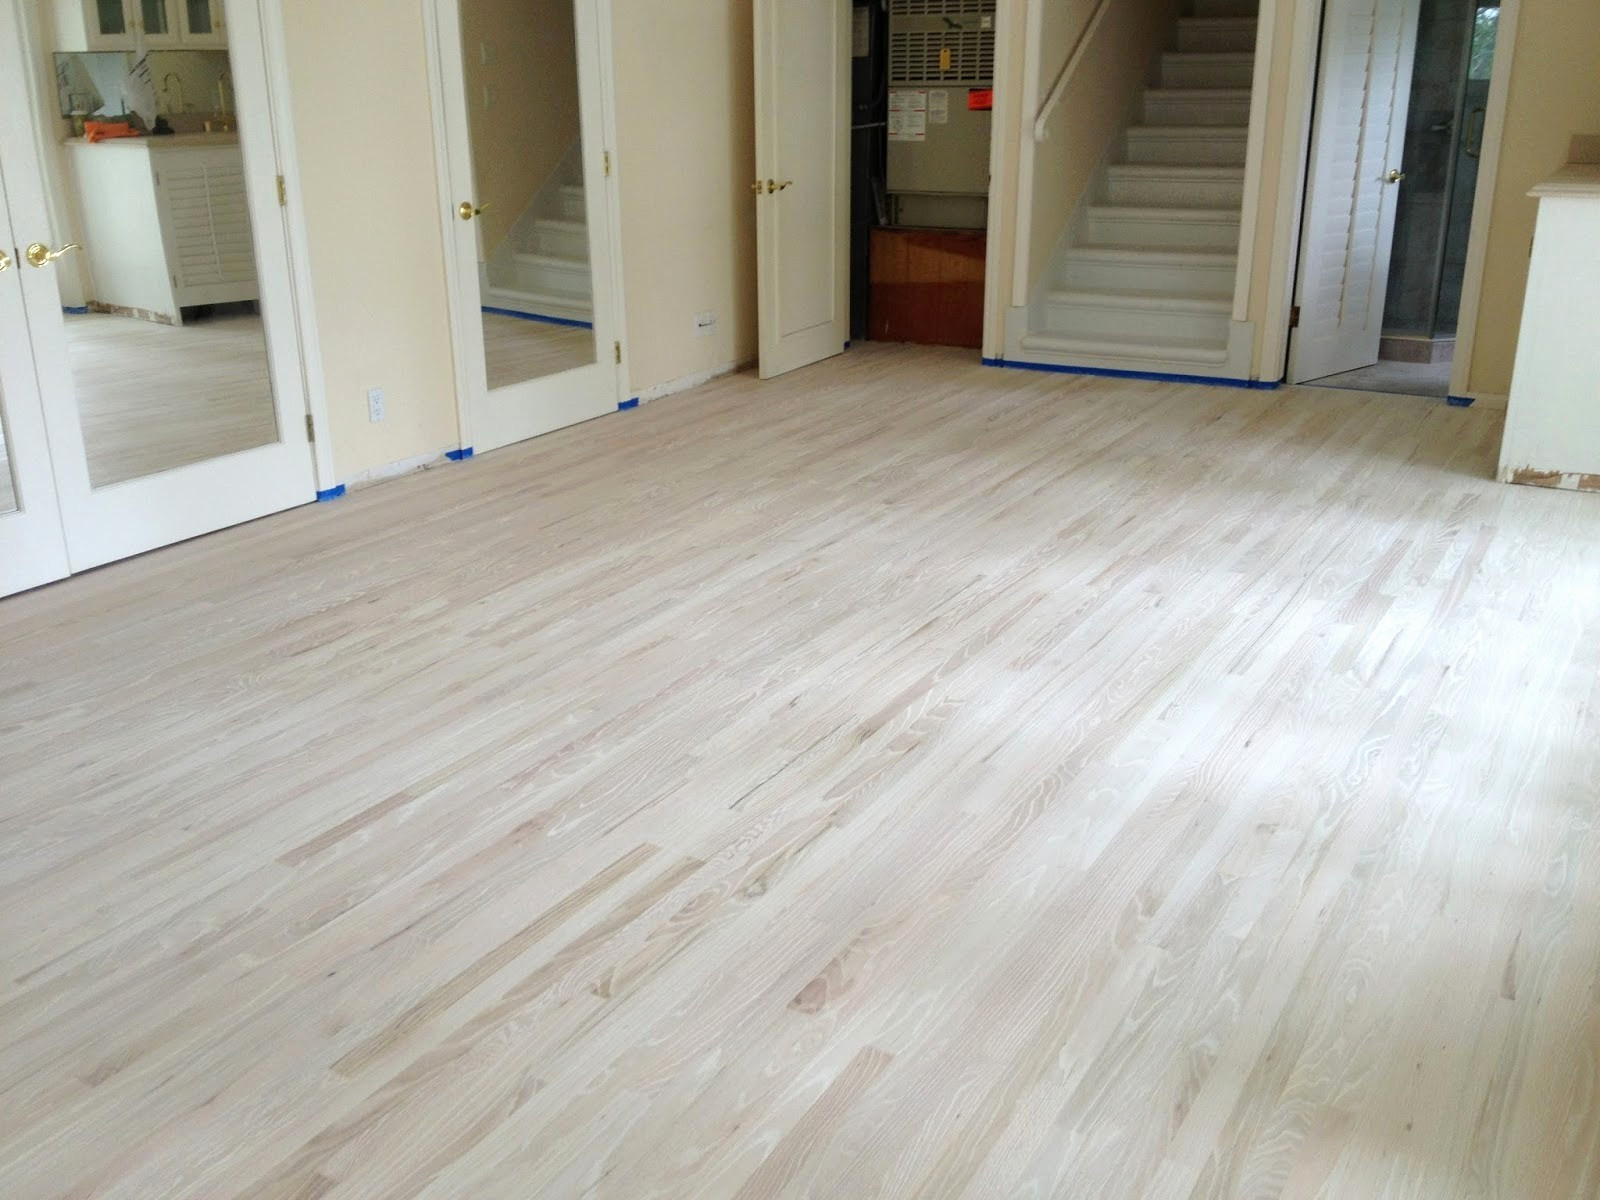 Cost to Refinish and Stain Hardwood Floors Of 19 Unique How Much Does It Cost to Refinish Hardwood Floors Gallery for How Much Does It Cost to Refinish Hardwood Floors Best Of Wp Content 2018 07 Ho